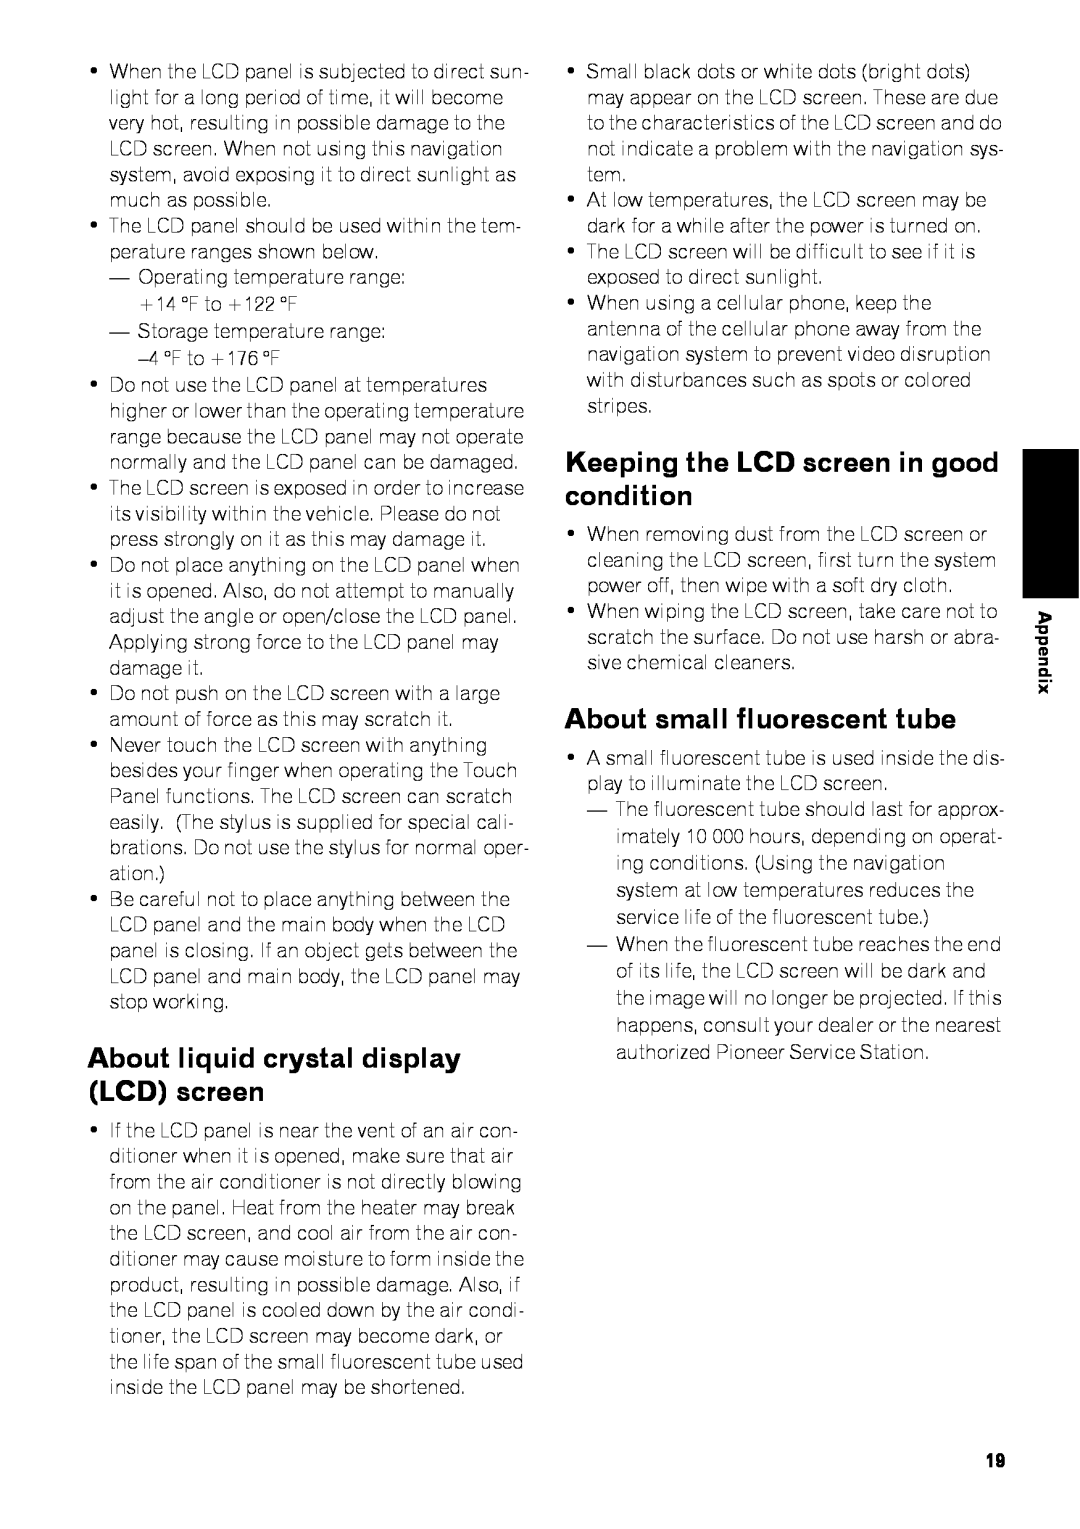 Pioneer AVIC-Z3 manual About liquid crystal display LCD screen, Keeping the LCD screen in good condition 